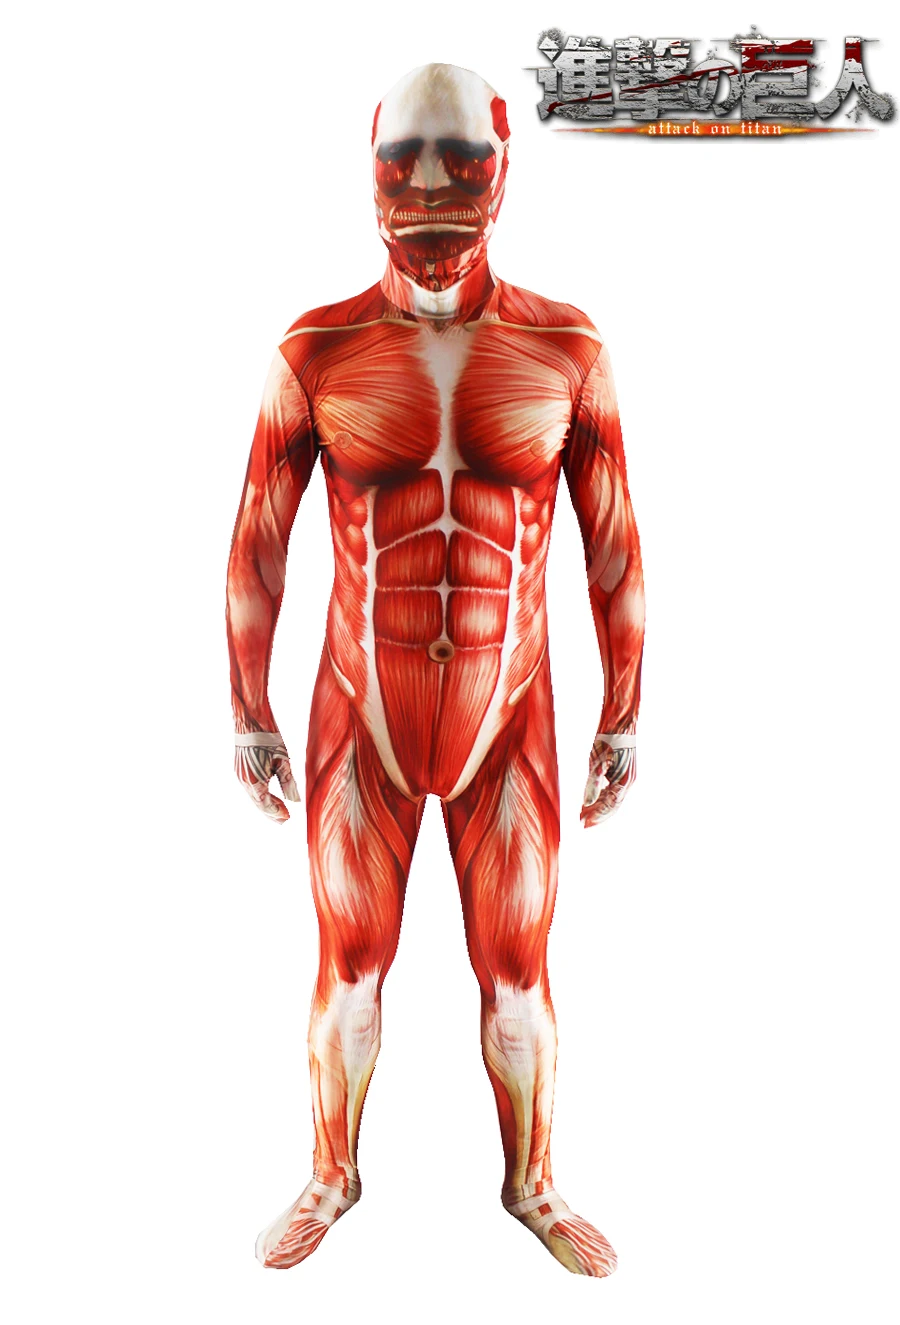 

Attack On Titan Cosplay Shingeki No Kyojin Cosplay Colossal Tights Muscle Man Halloween Costumes For Men Adult Zentai